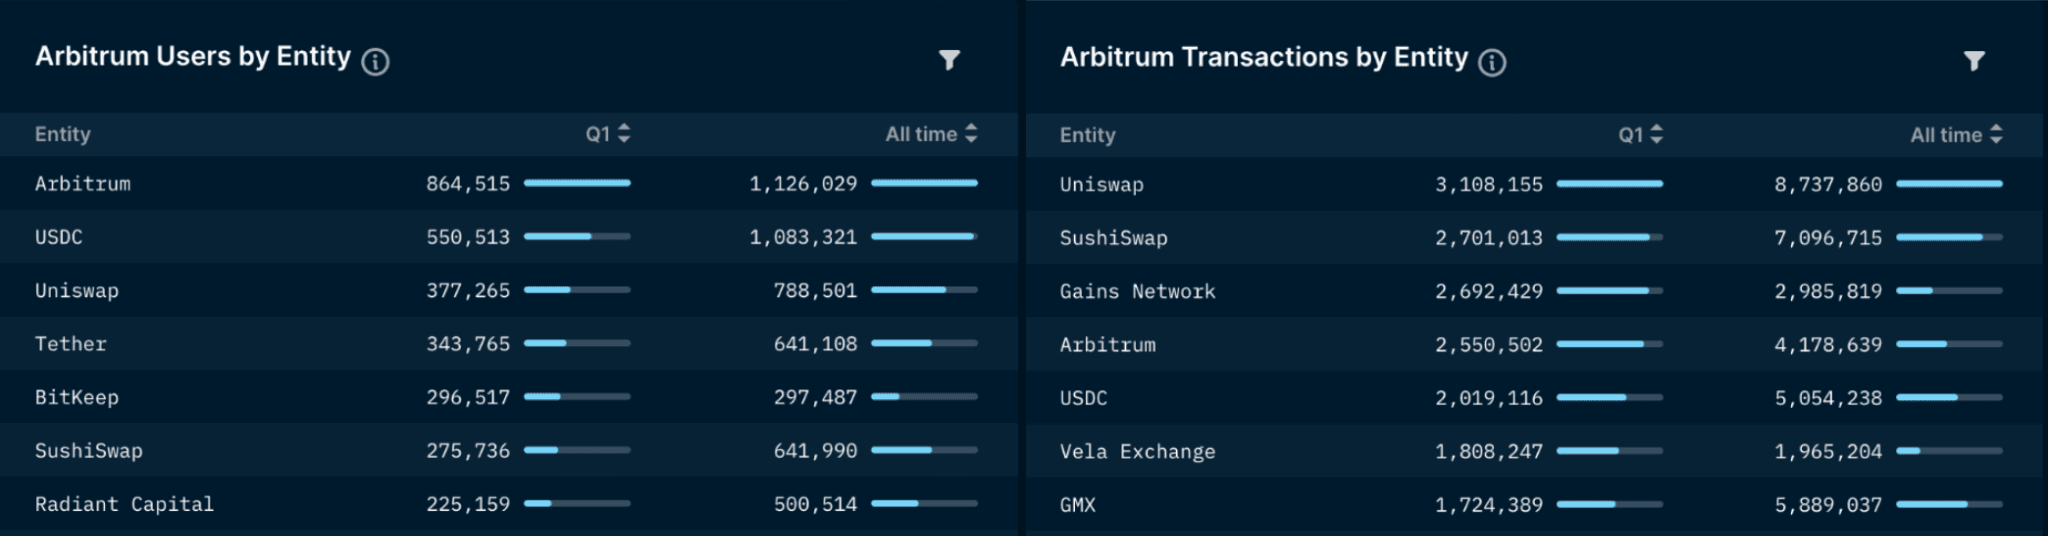 Top Entities by Users and Transactions (data excludes unlabelled entities)